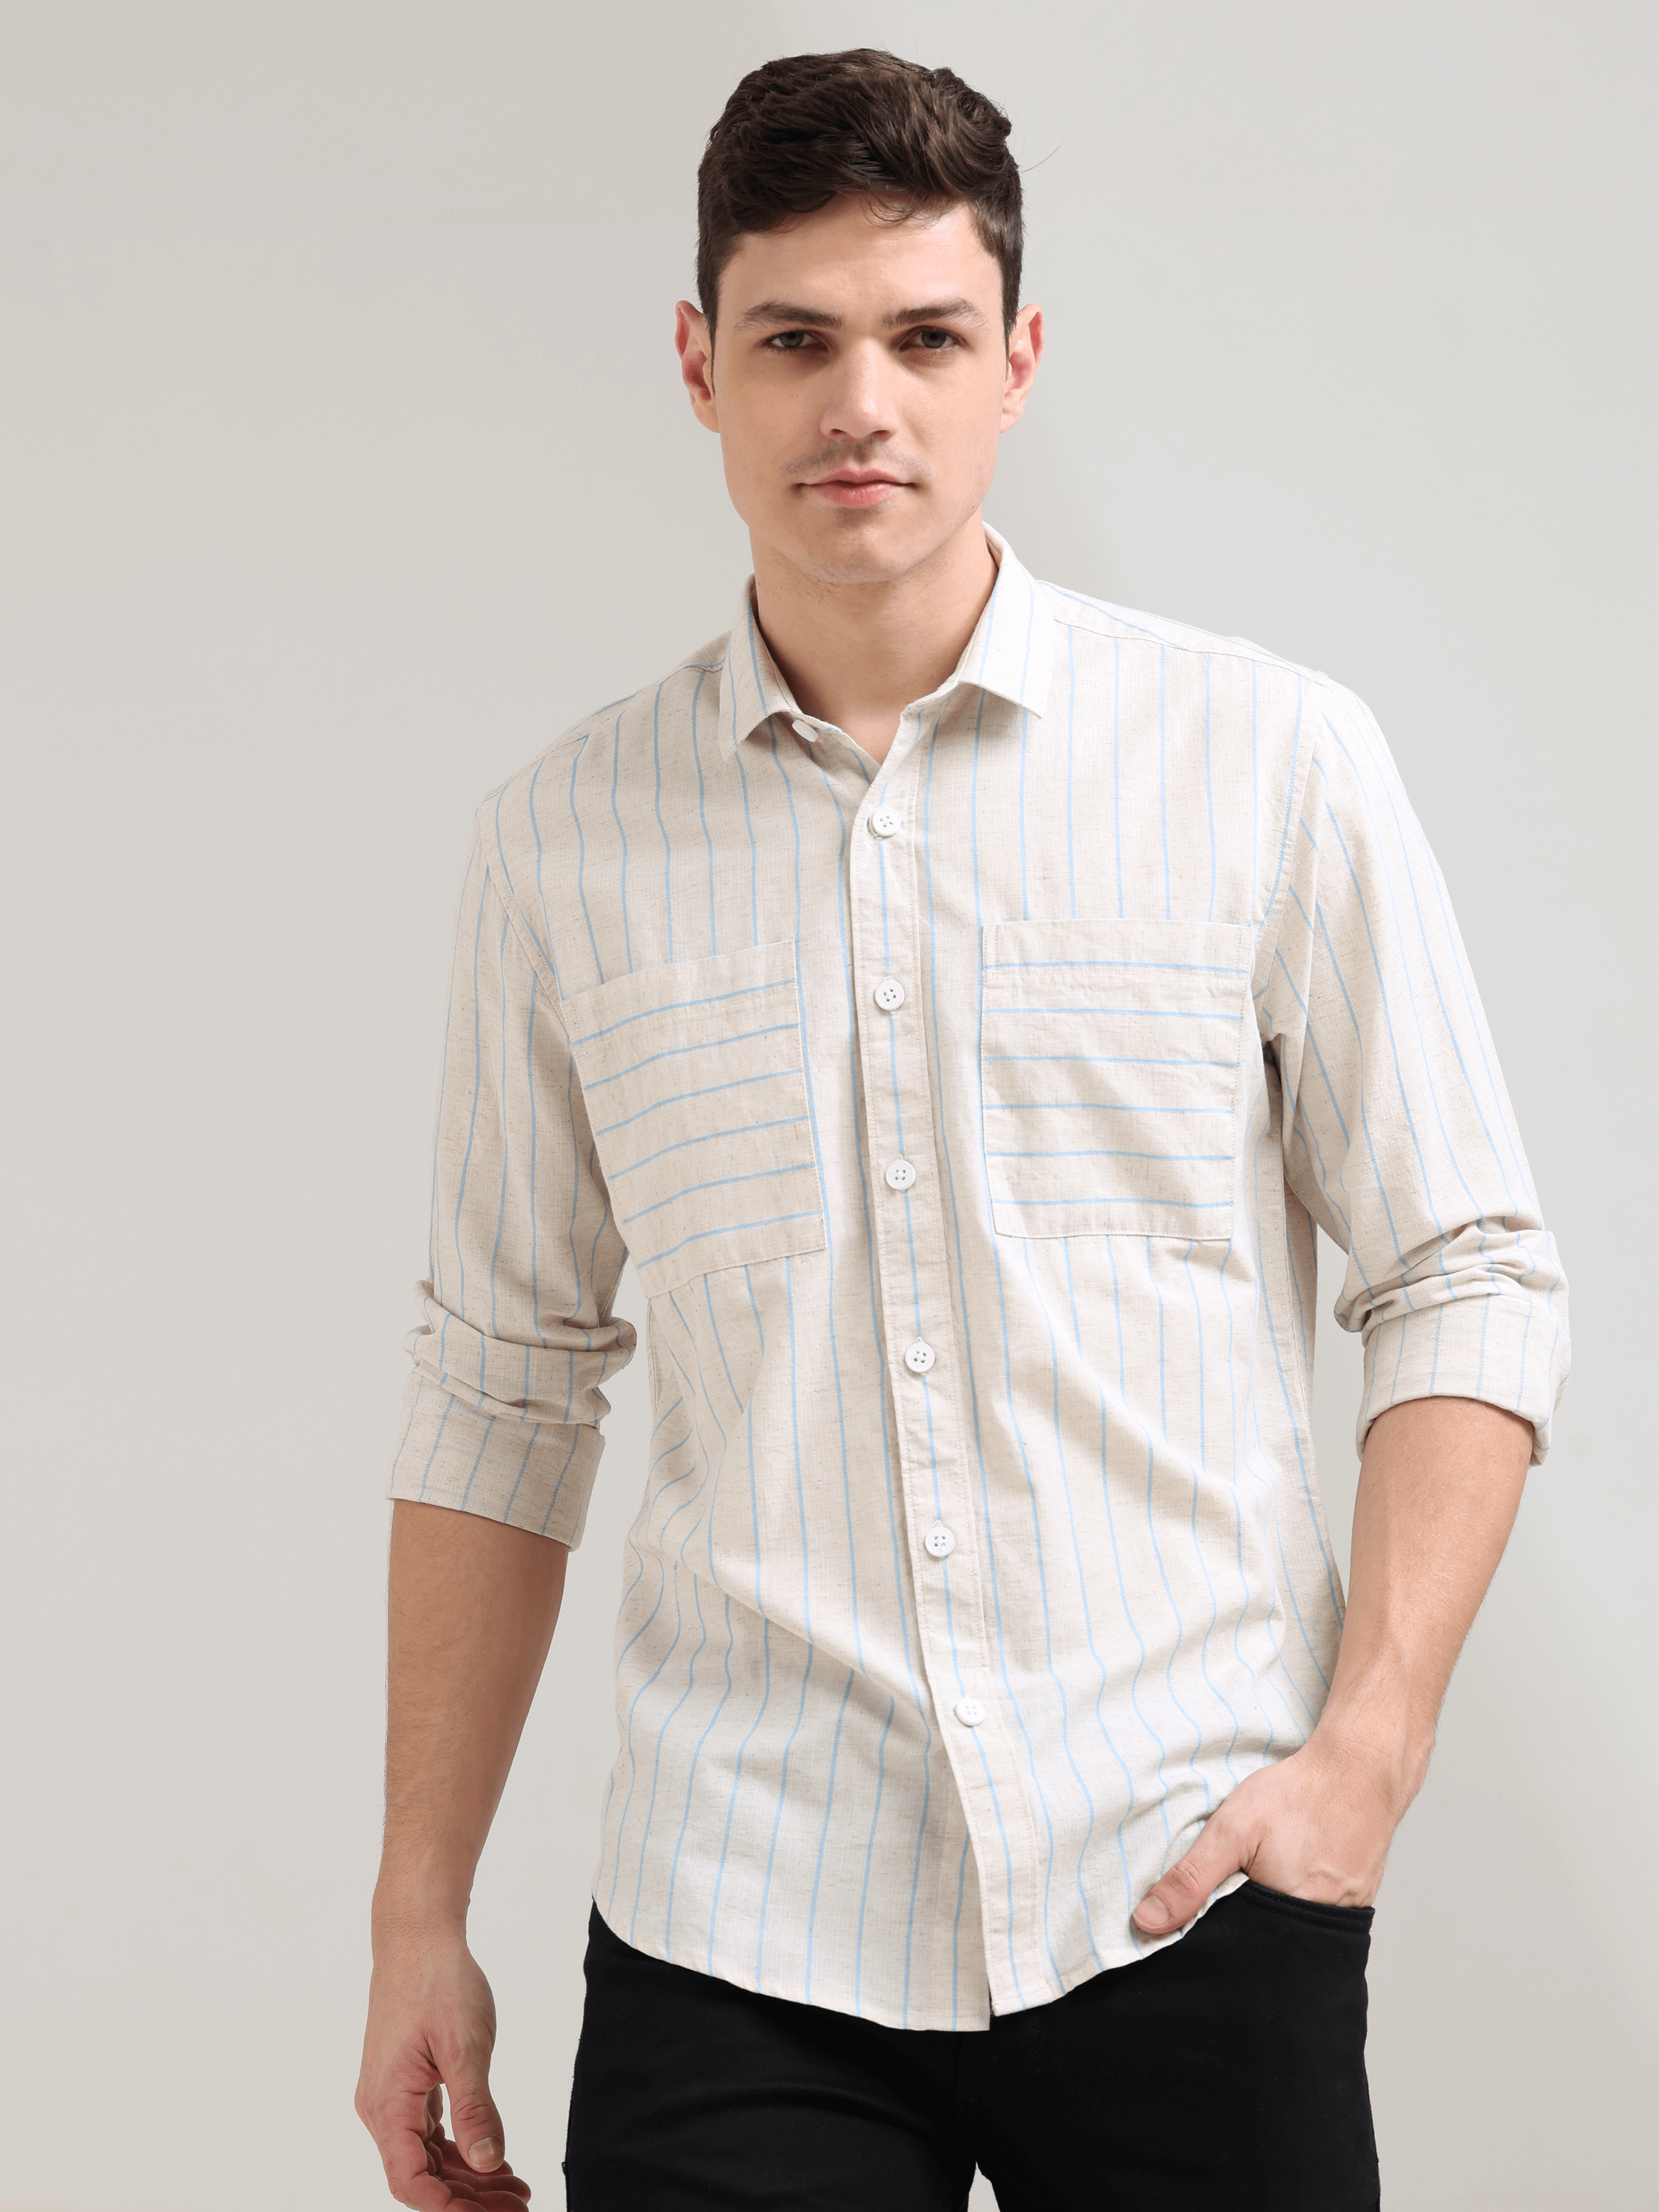 Pure Cotton Blue Stripes Casual Shirt shop online at Estilocus. 100% Cotton • Full-sleeve check shirt• Cut and sew placket• Regular collar• Double button edge cuff• Double pocket • Curved bottom hemline .• All double needle construction, finest quality se